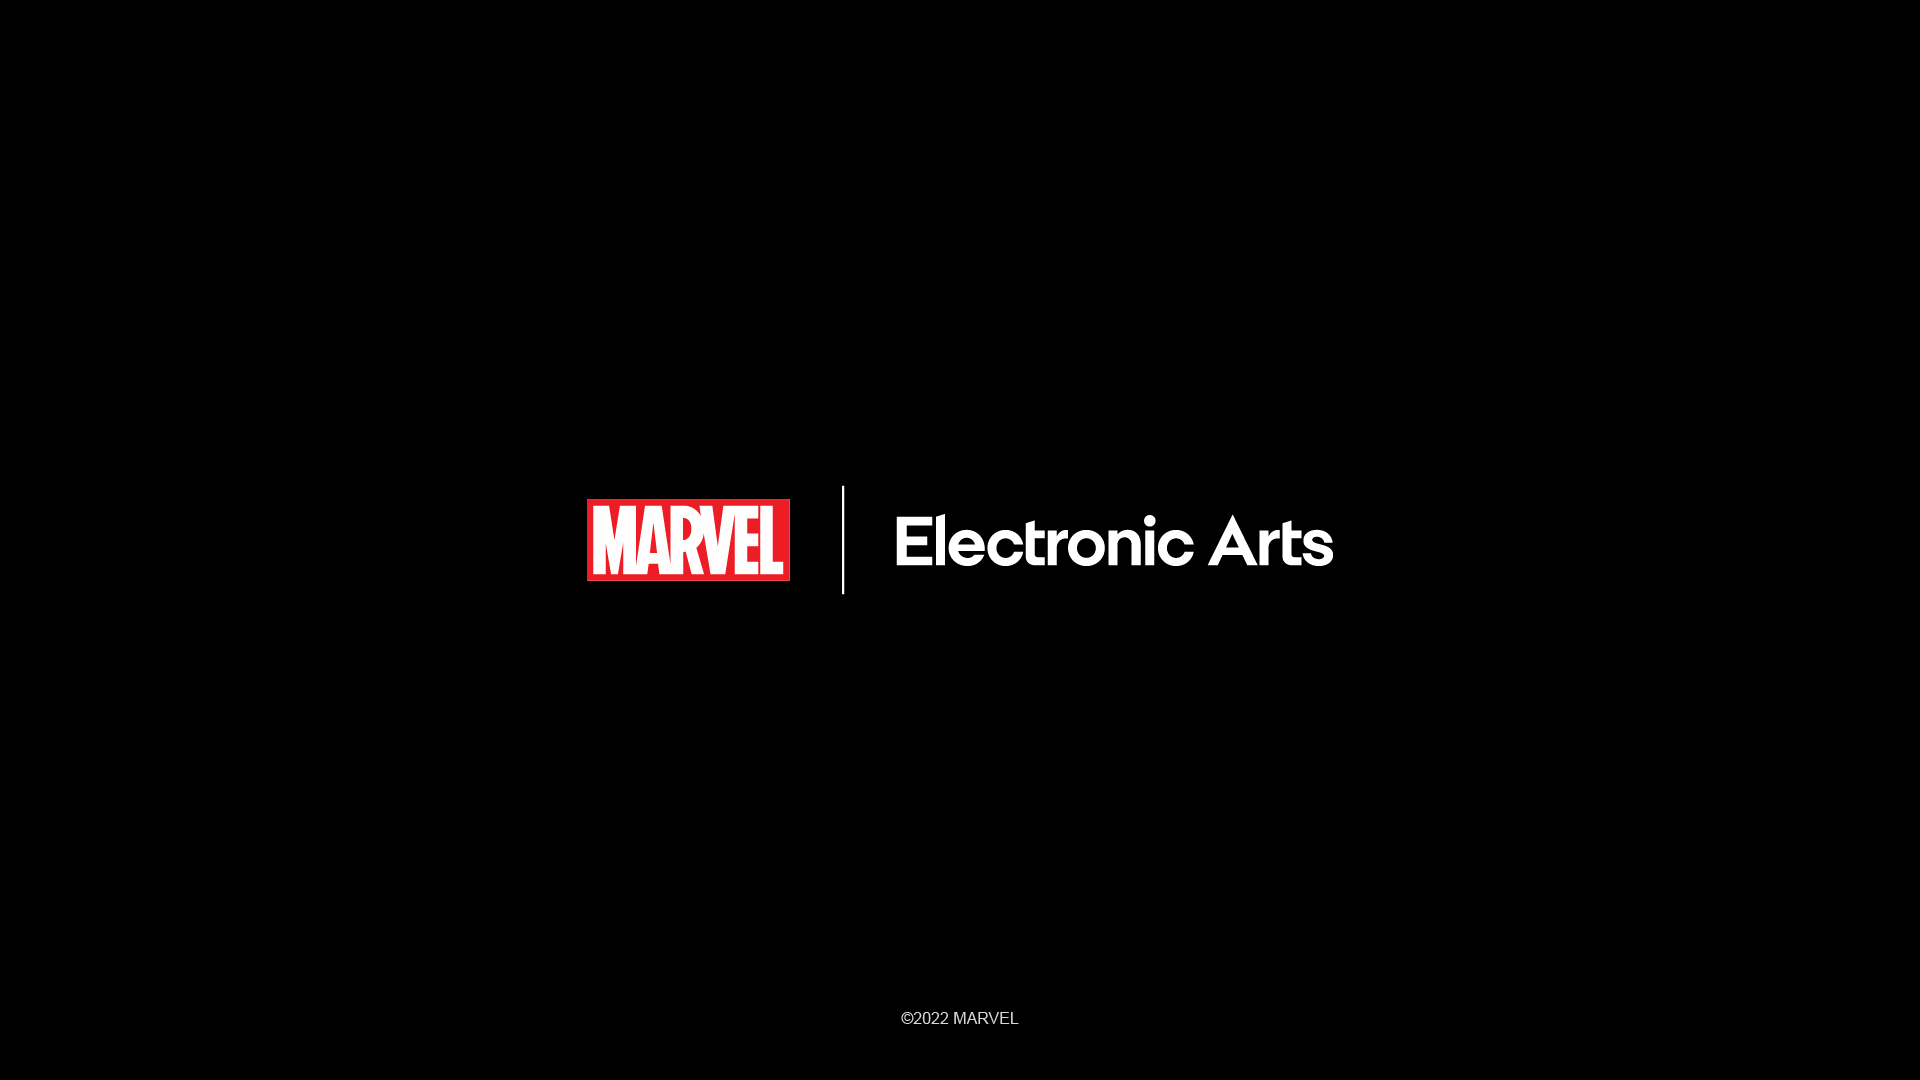 Electronic Arts announces “at least three action adventure games” set in the Marvel universe